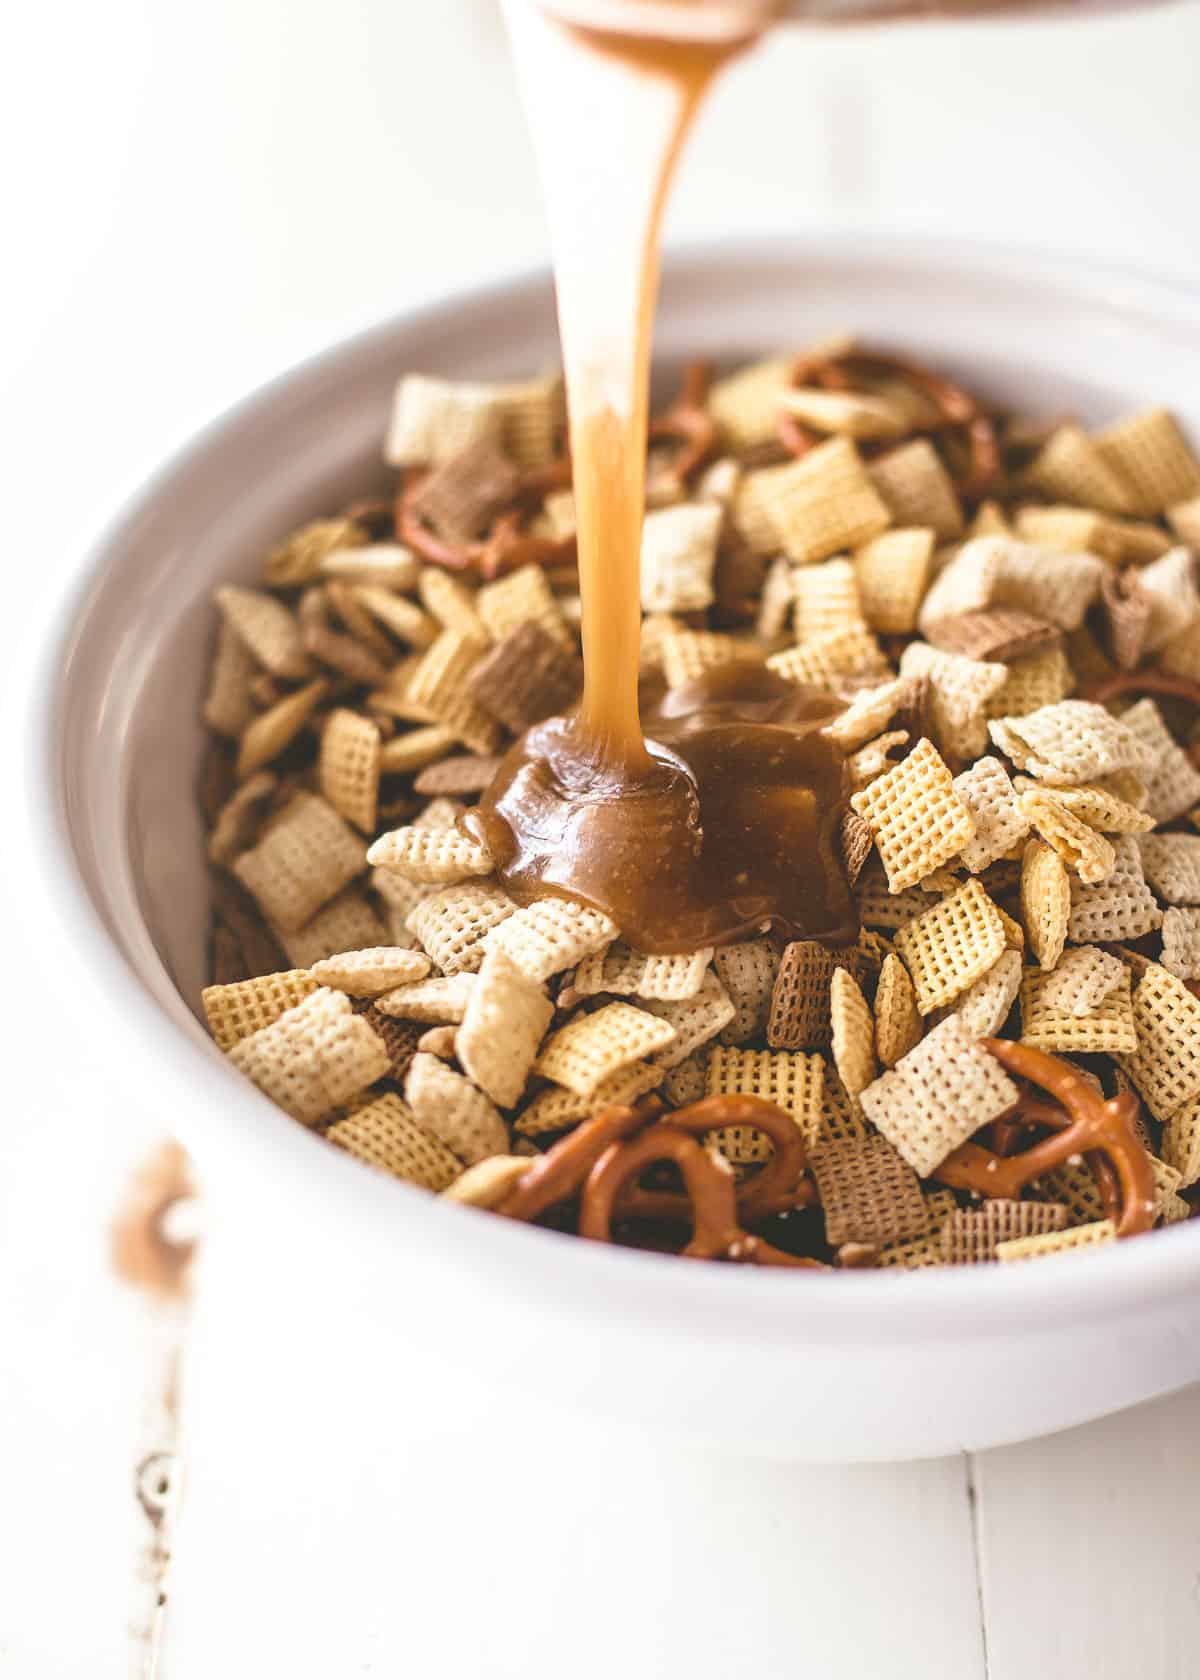 adding syrup to snack mix in a white bowl